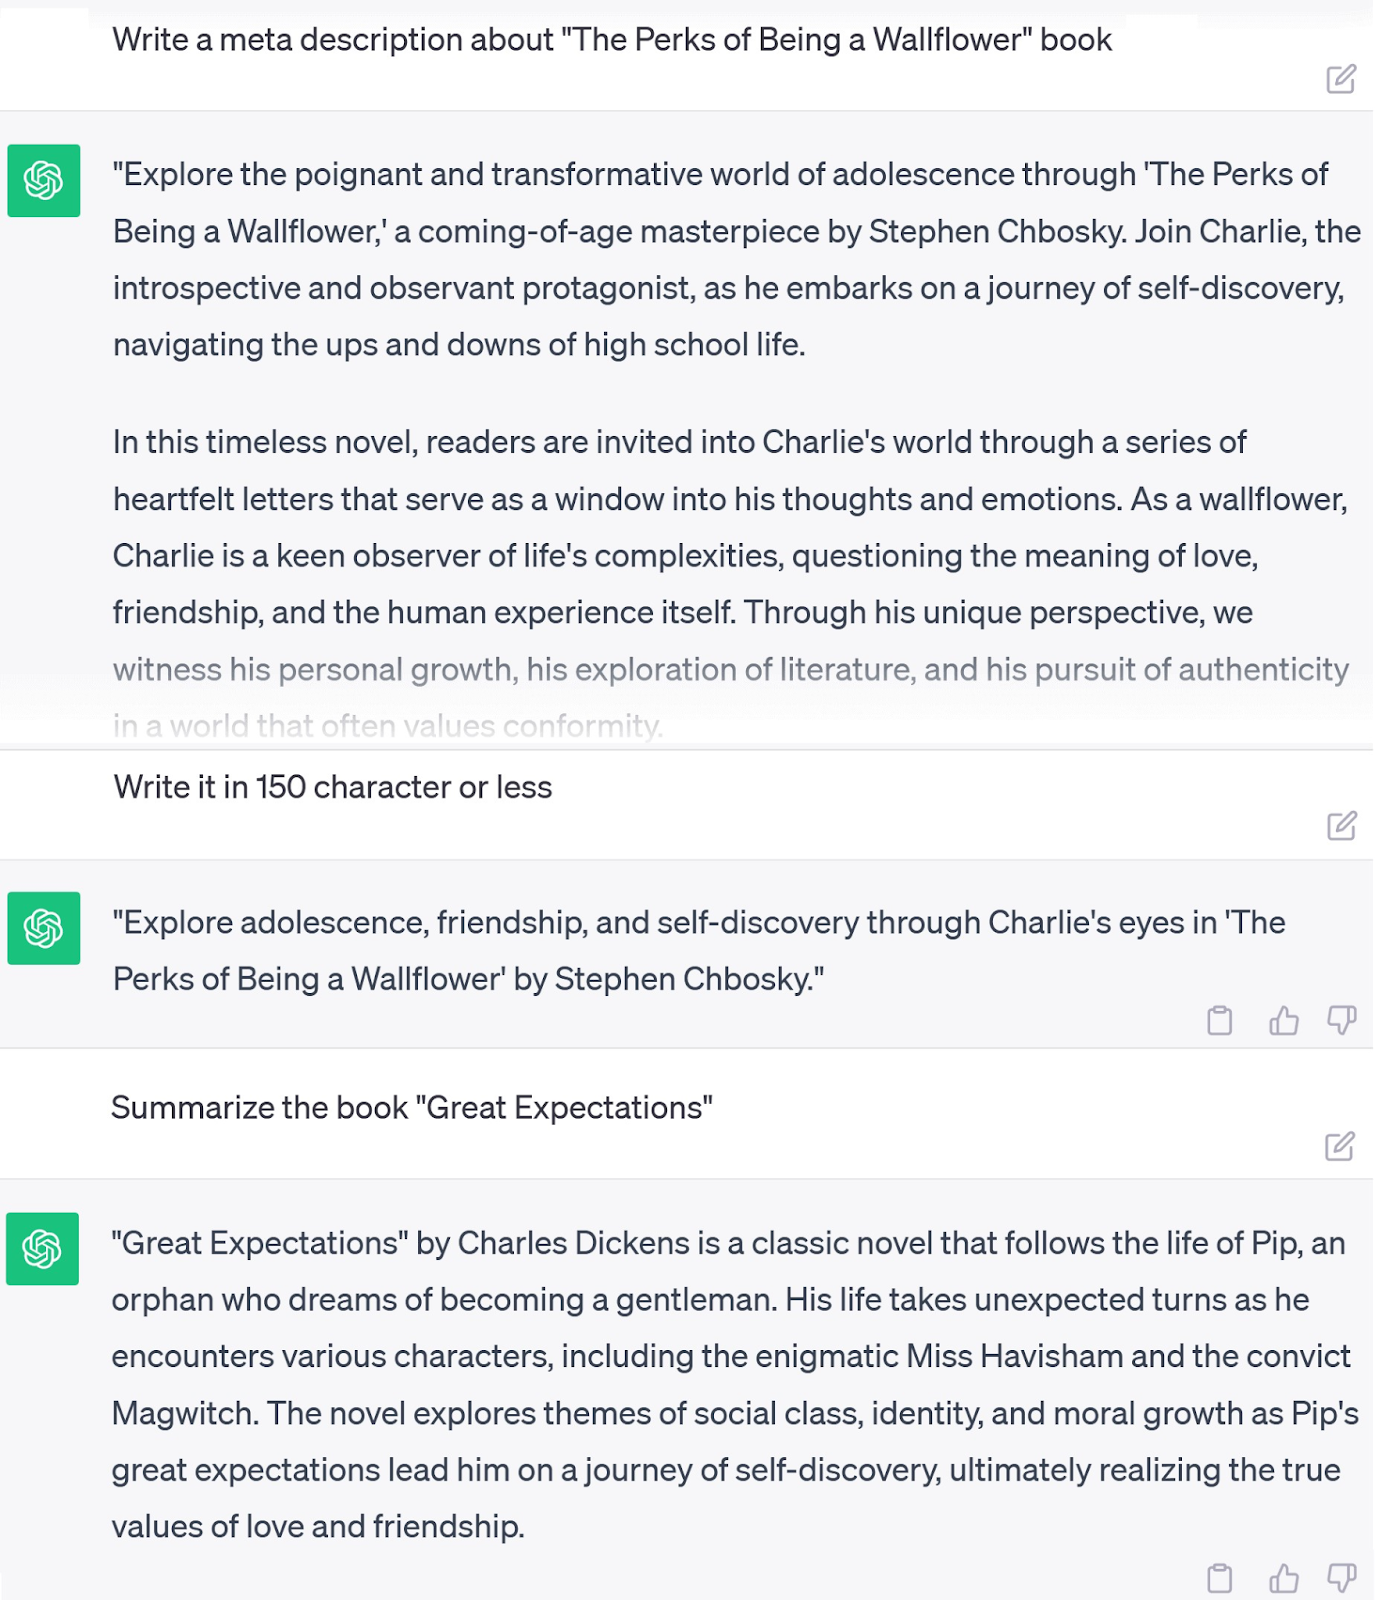 An example of ChatGPT using previous input to summarize the book “Great Expectations”